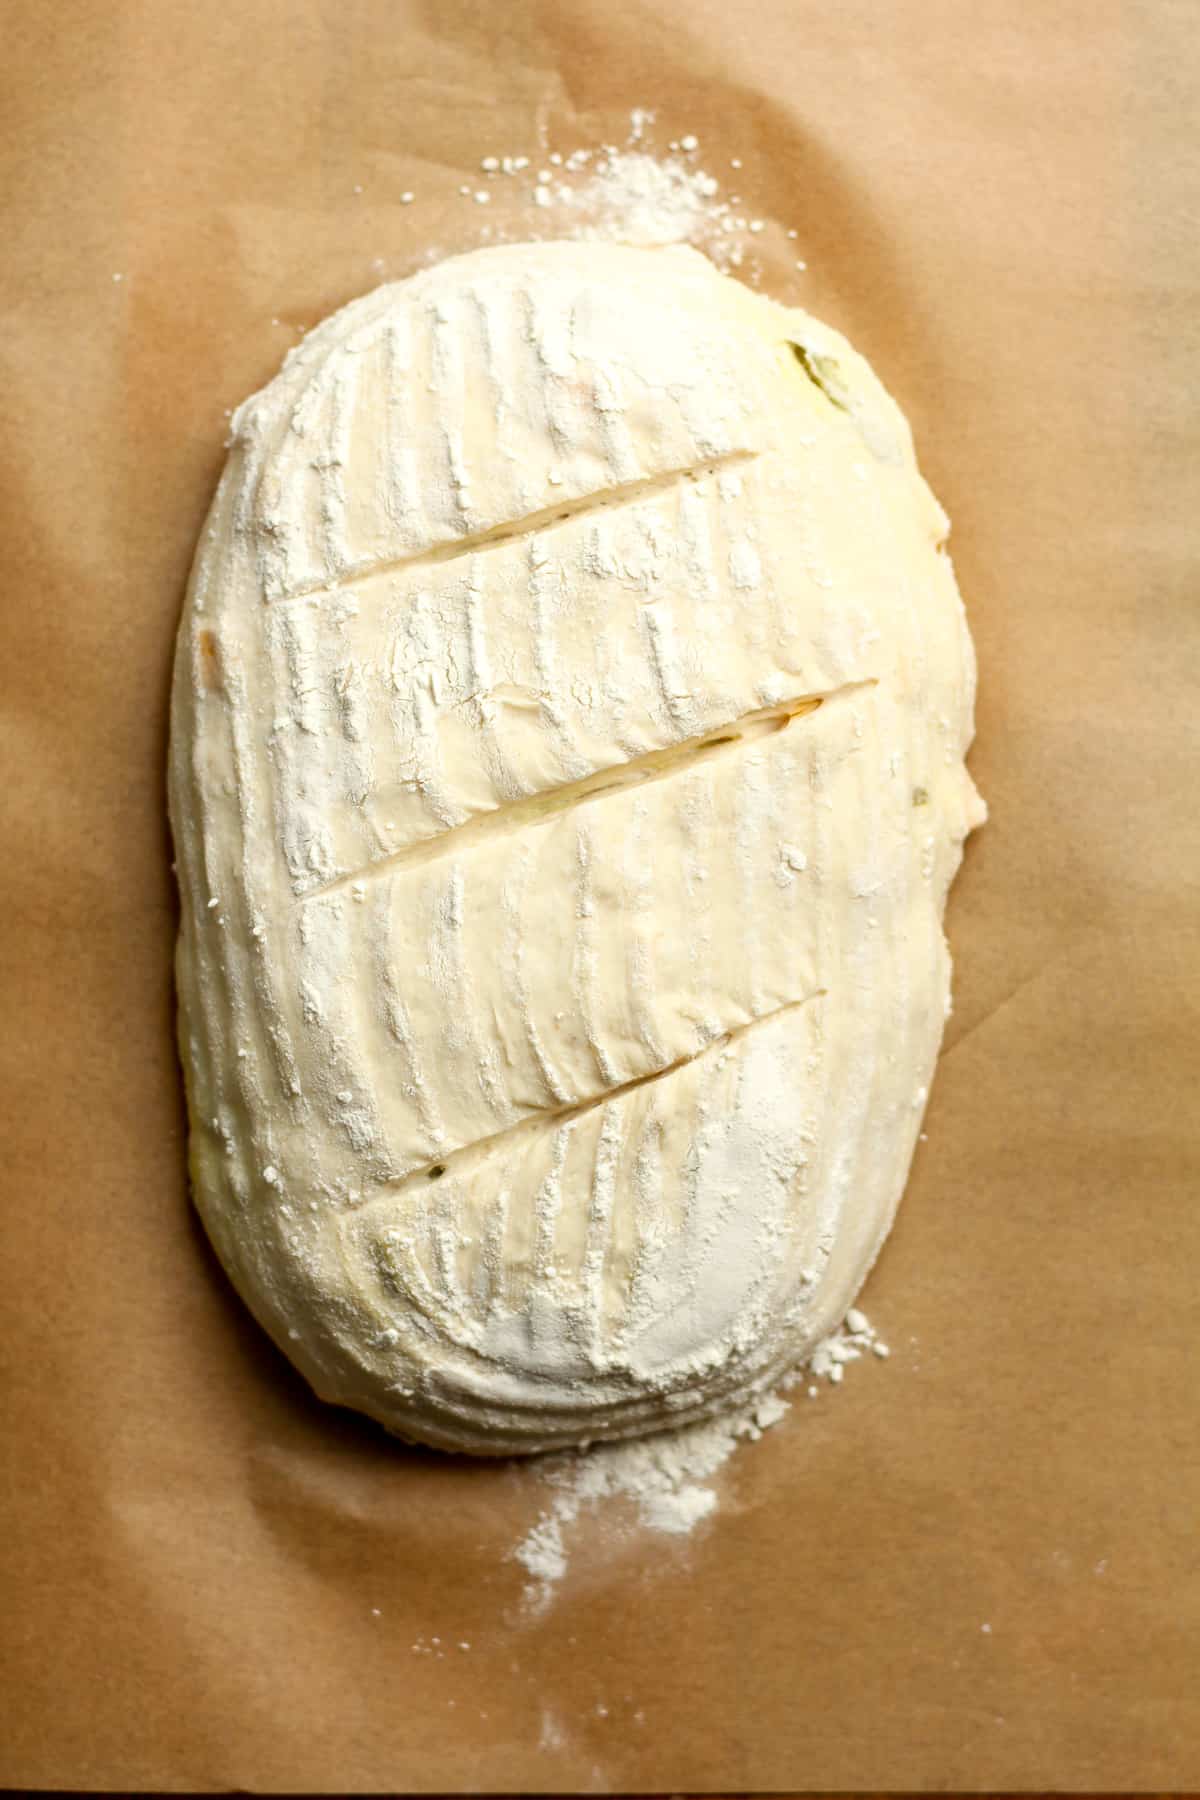 The loaf of dough formed with slits.